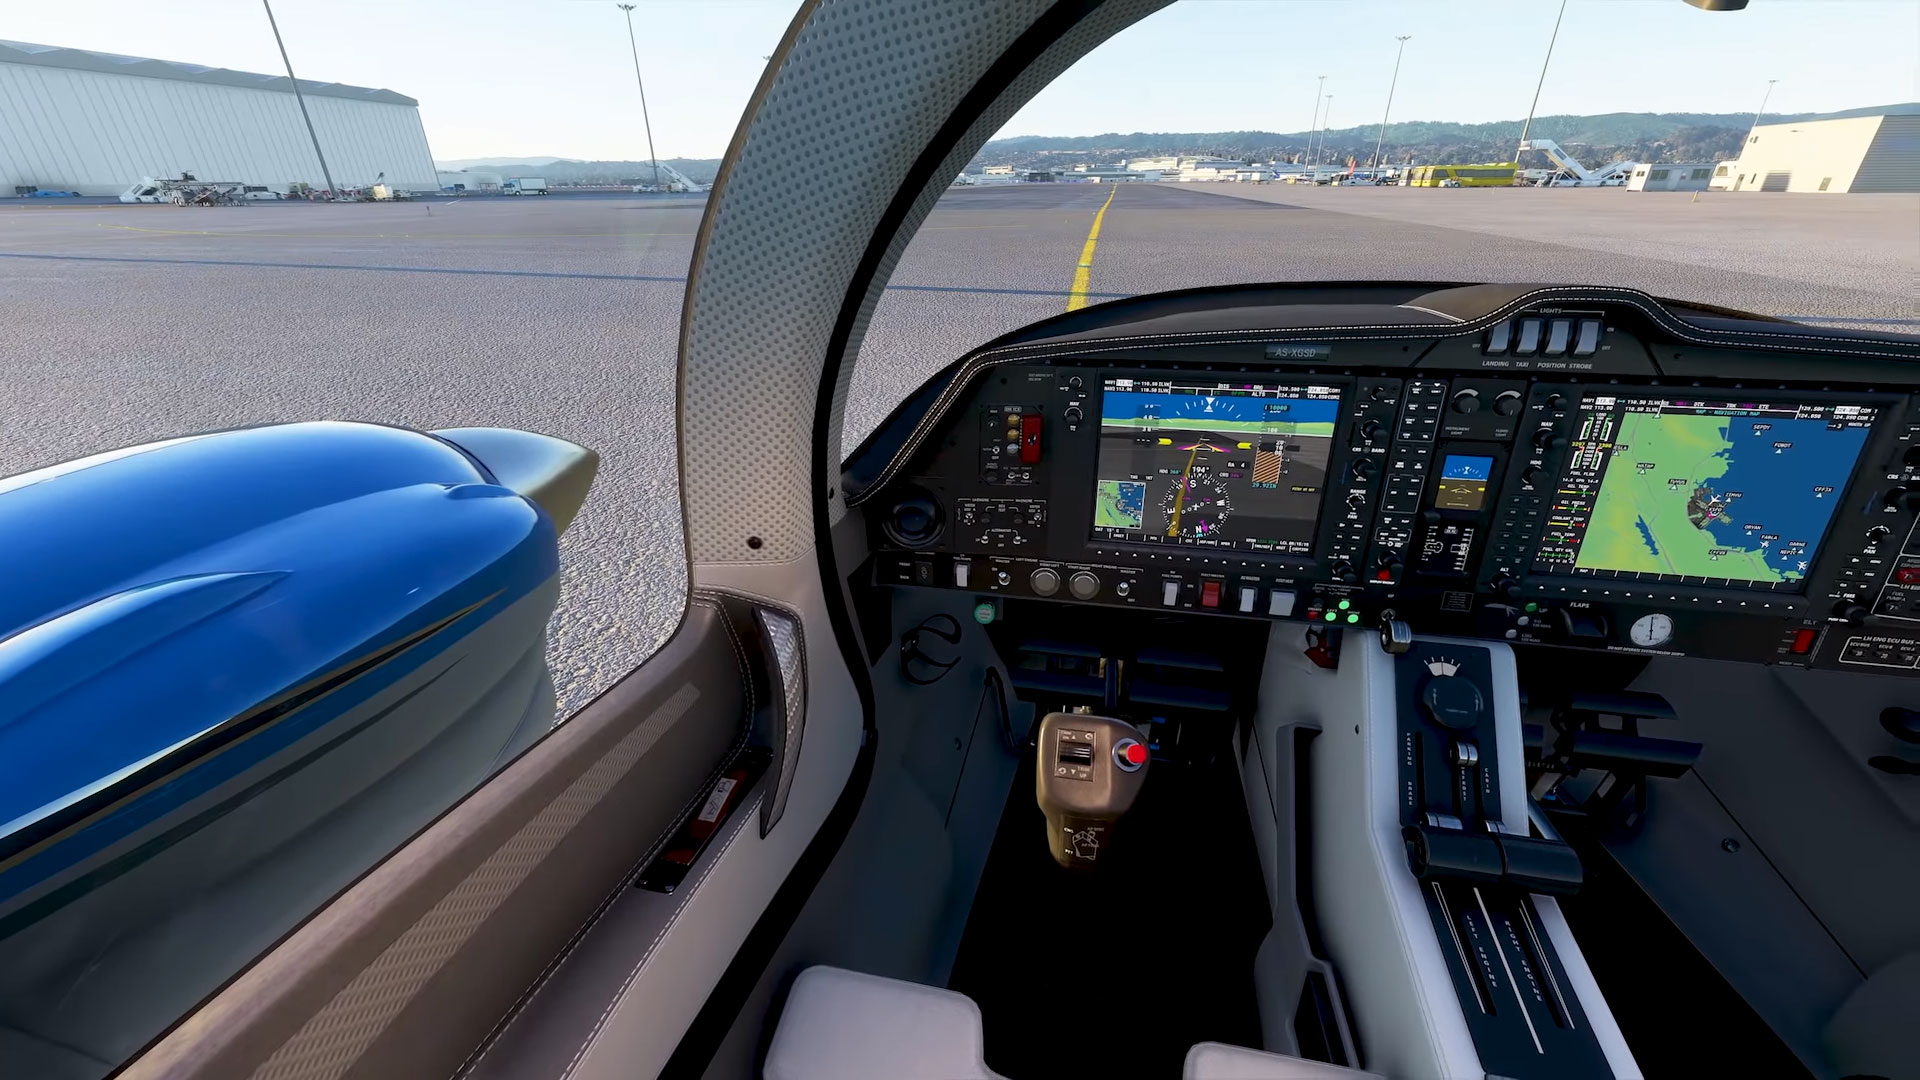 Which version of Microsoft Flight Simulator 2020 should you buy